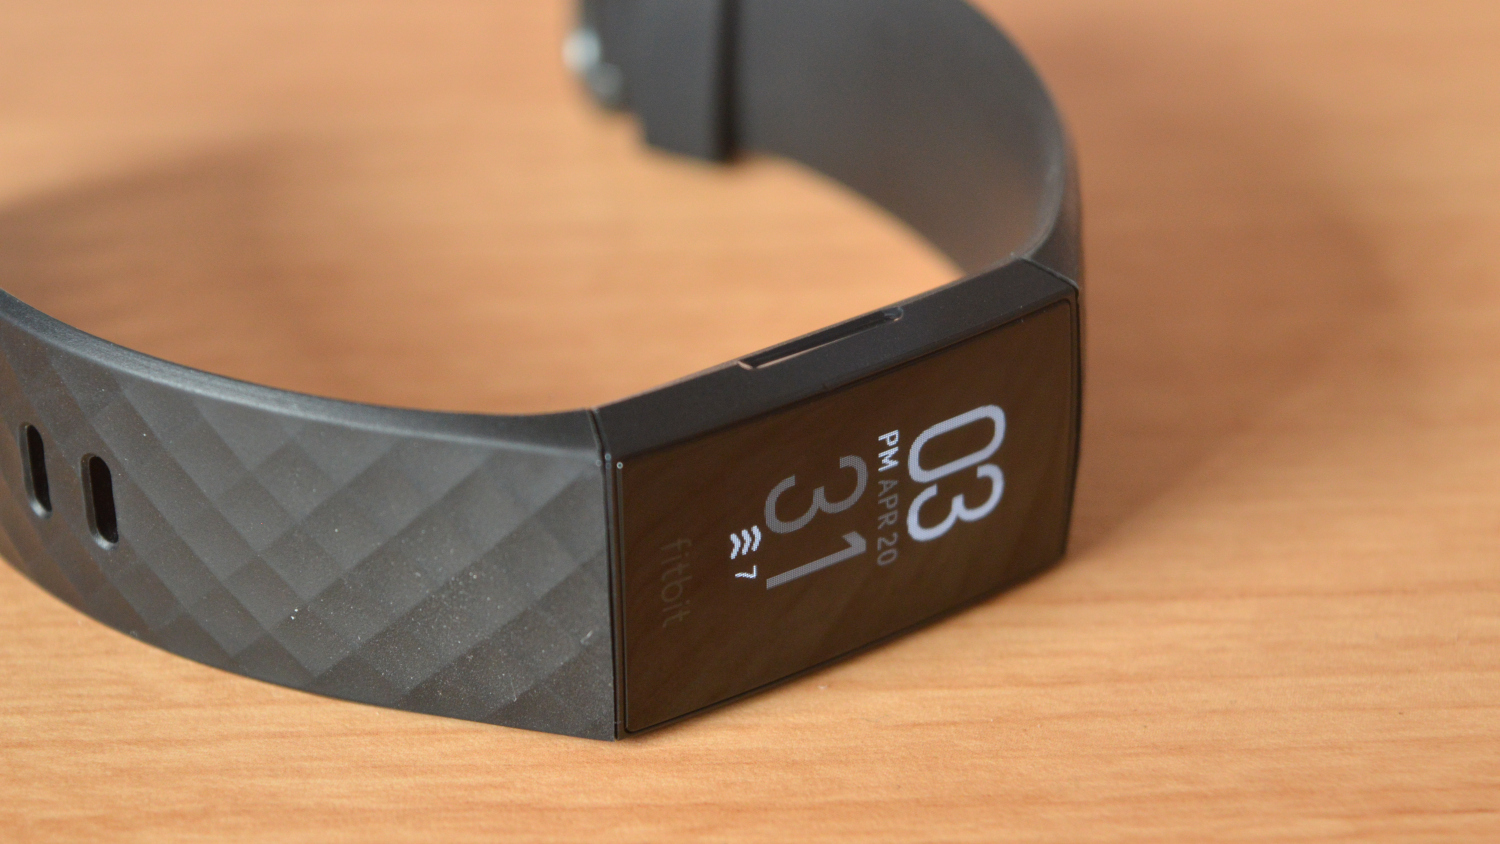 Fitbit Charge 4 Review: The Fitness Tracker To Buy